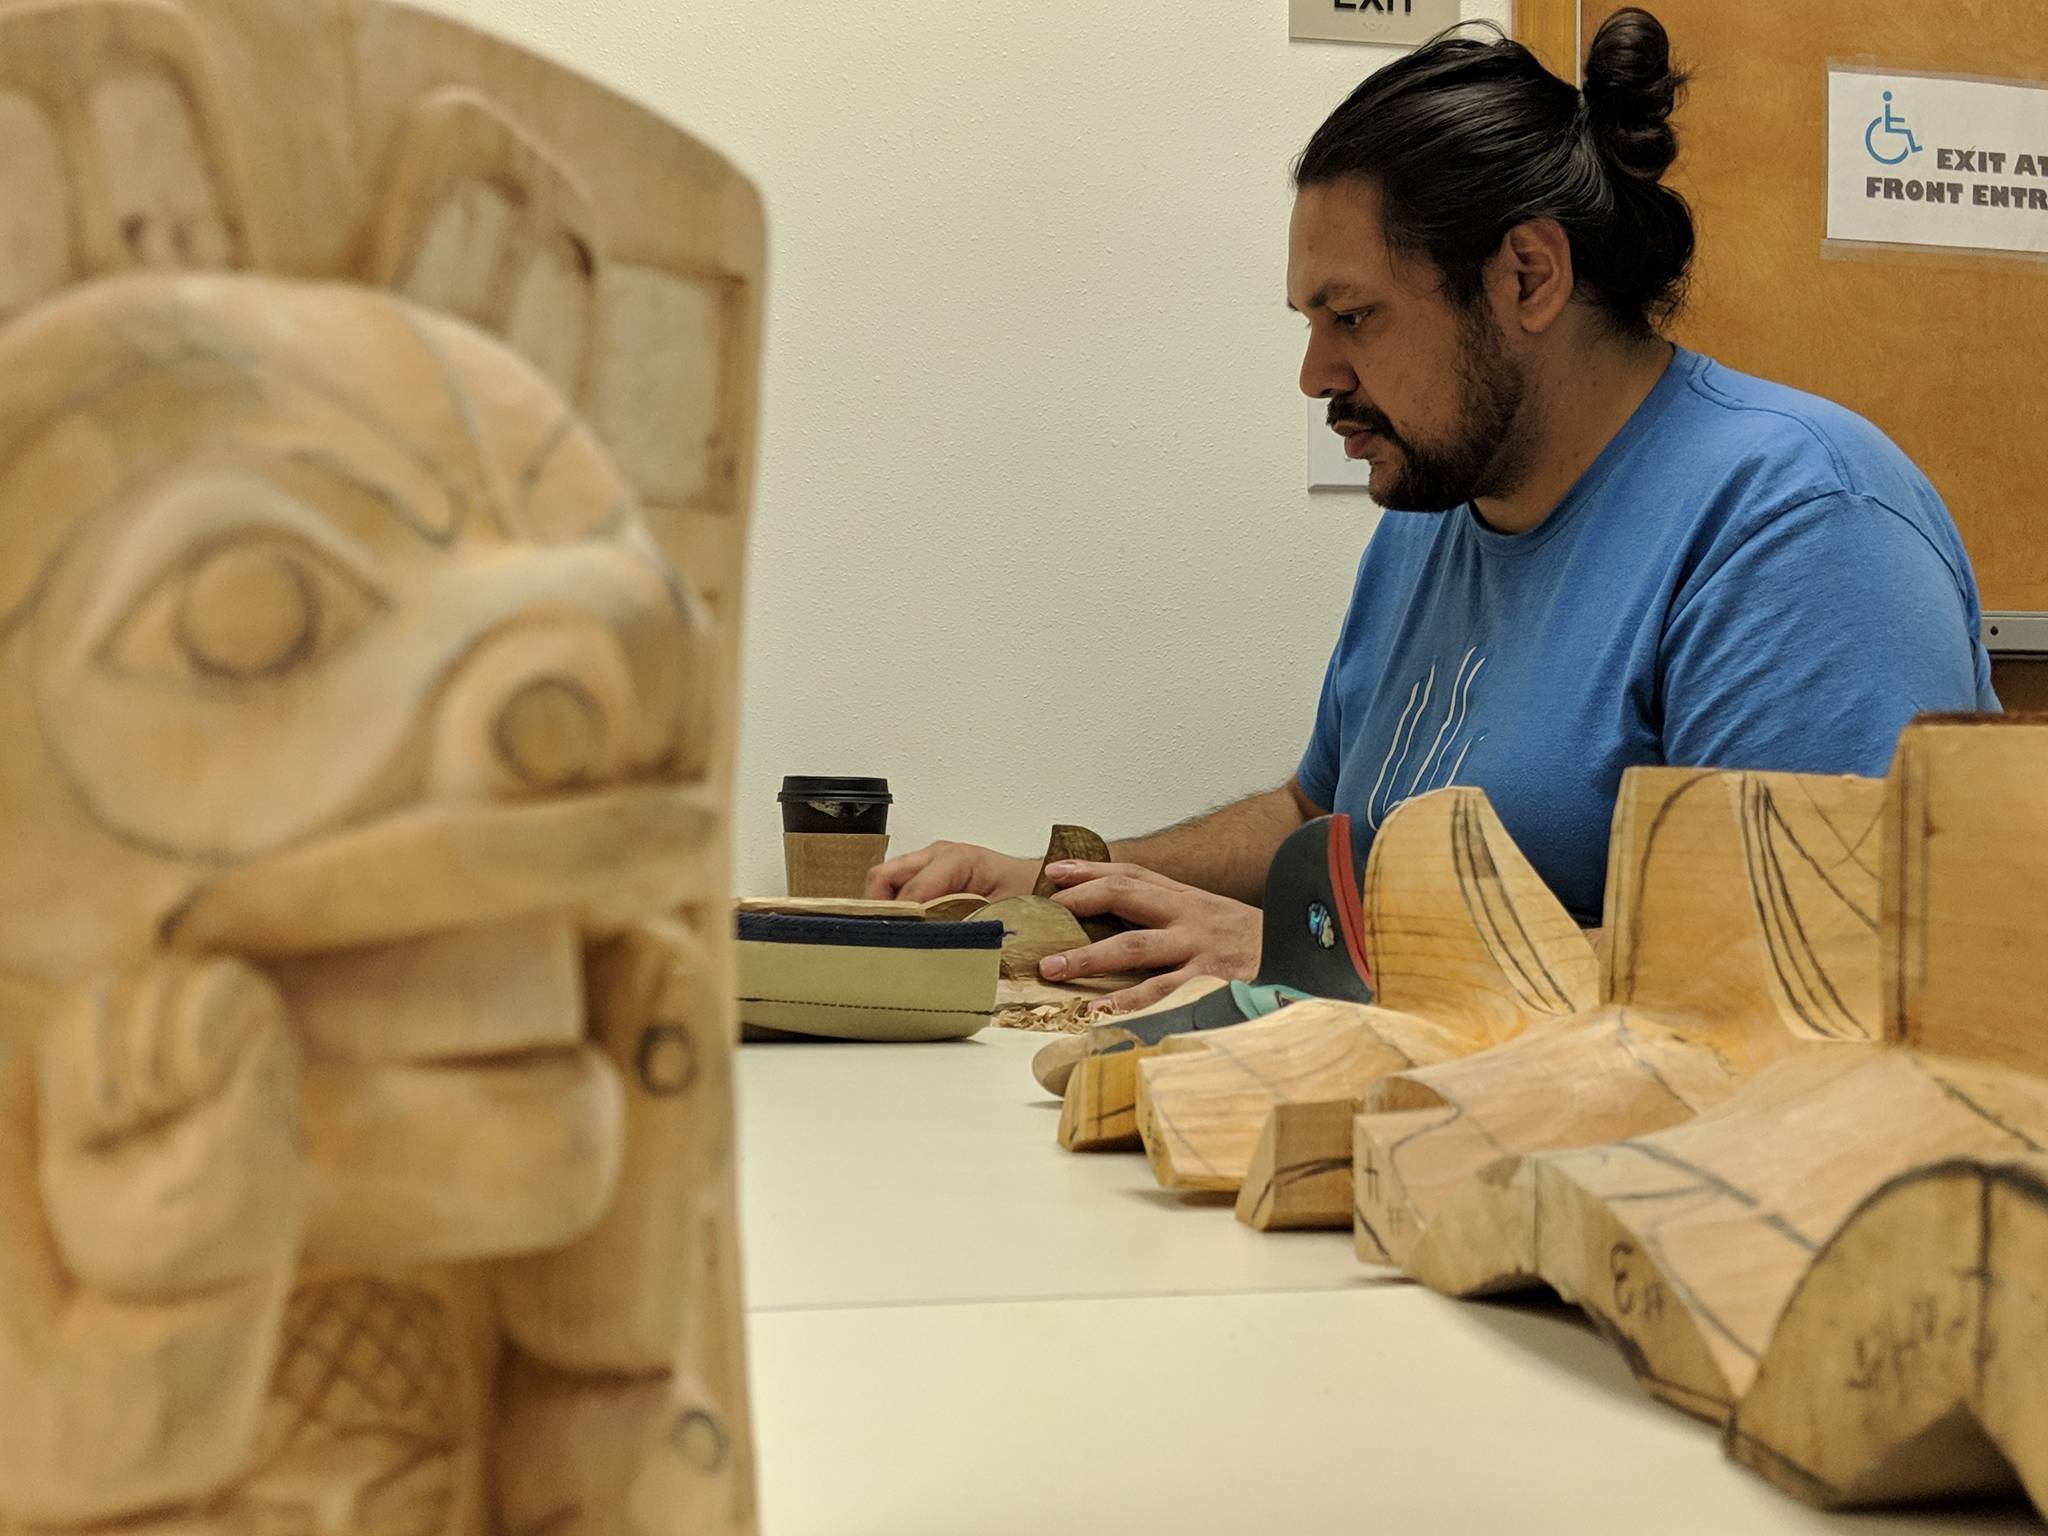 Too<span id=">k</span></span> Gregory carves during Saturday carving practice Saturday, Jan. 12, 2019. The practices are sponsored Sealaska Heritage Institute and facilitated by Gregory’s uncle, Donald Gregory. (Ben Hohenstatt | Capital City Weekly)